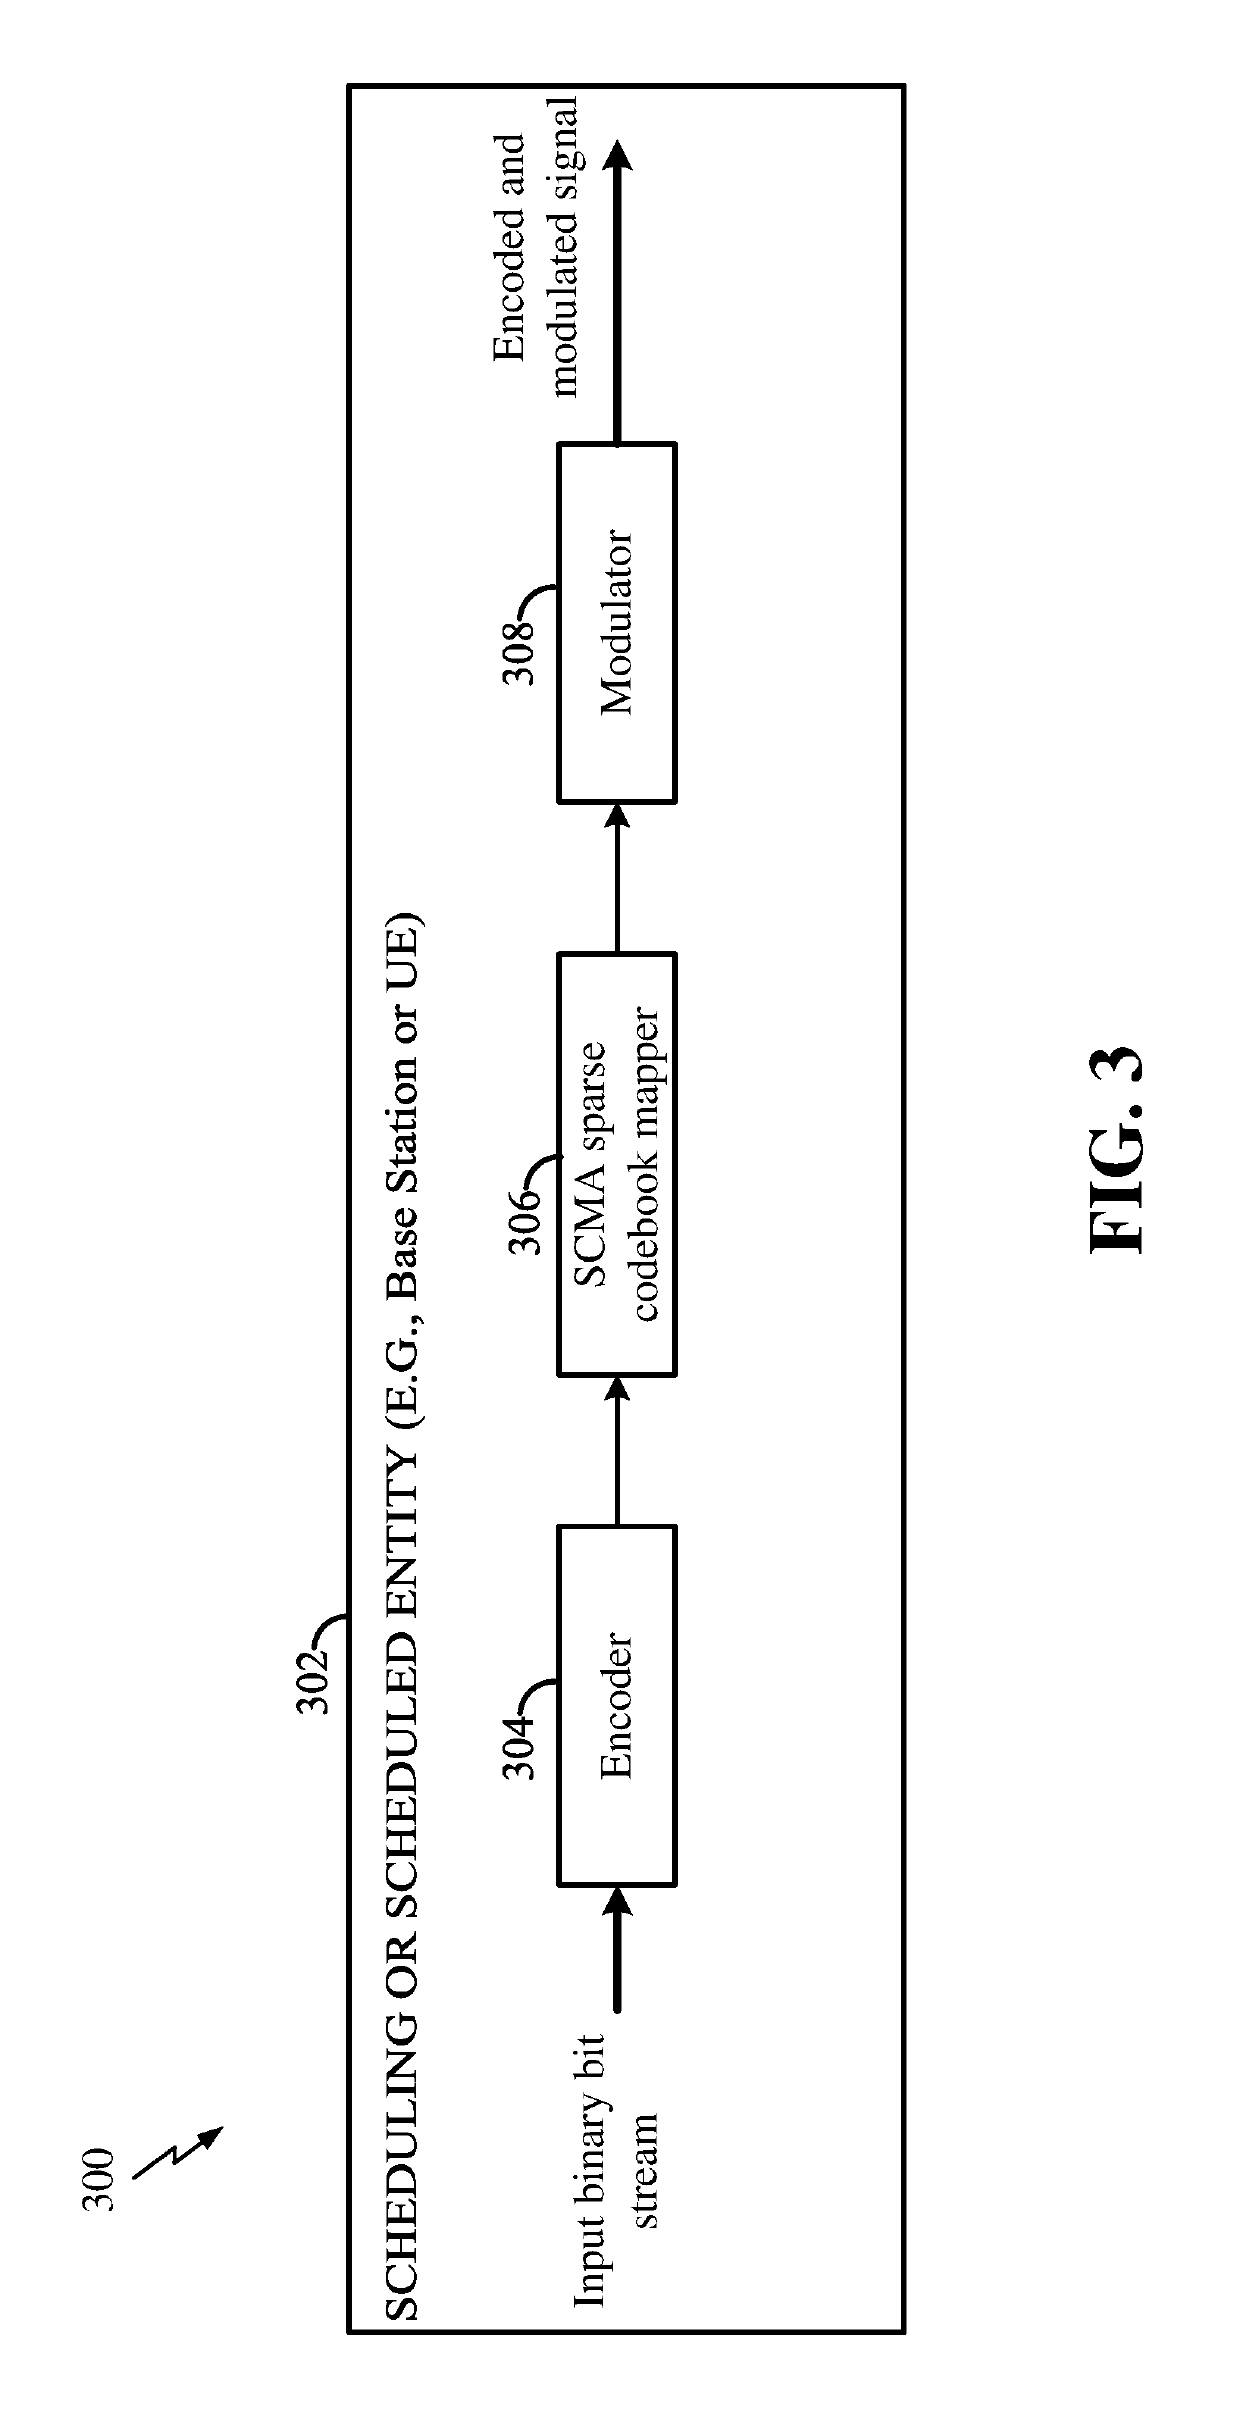 Methods and apparatus for construction of SCMA codebooks